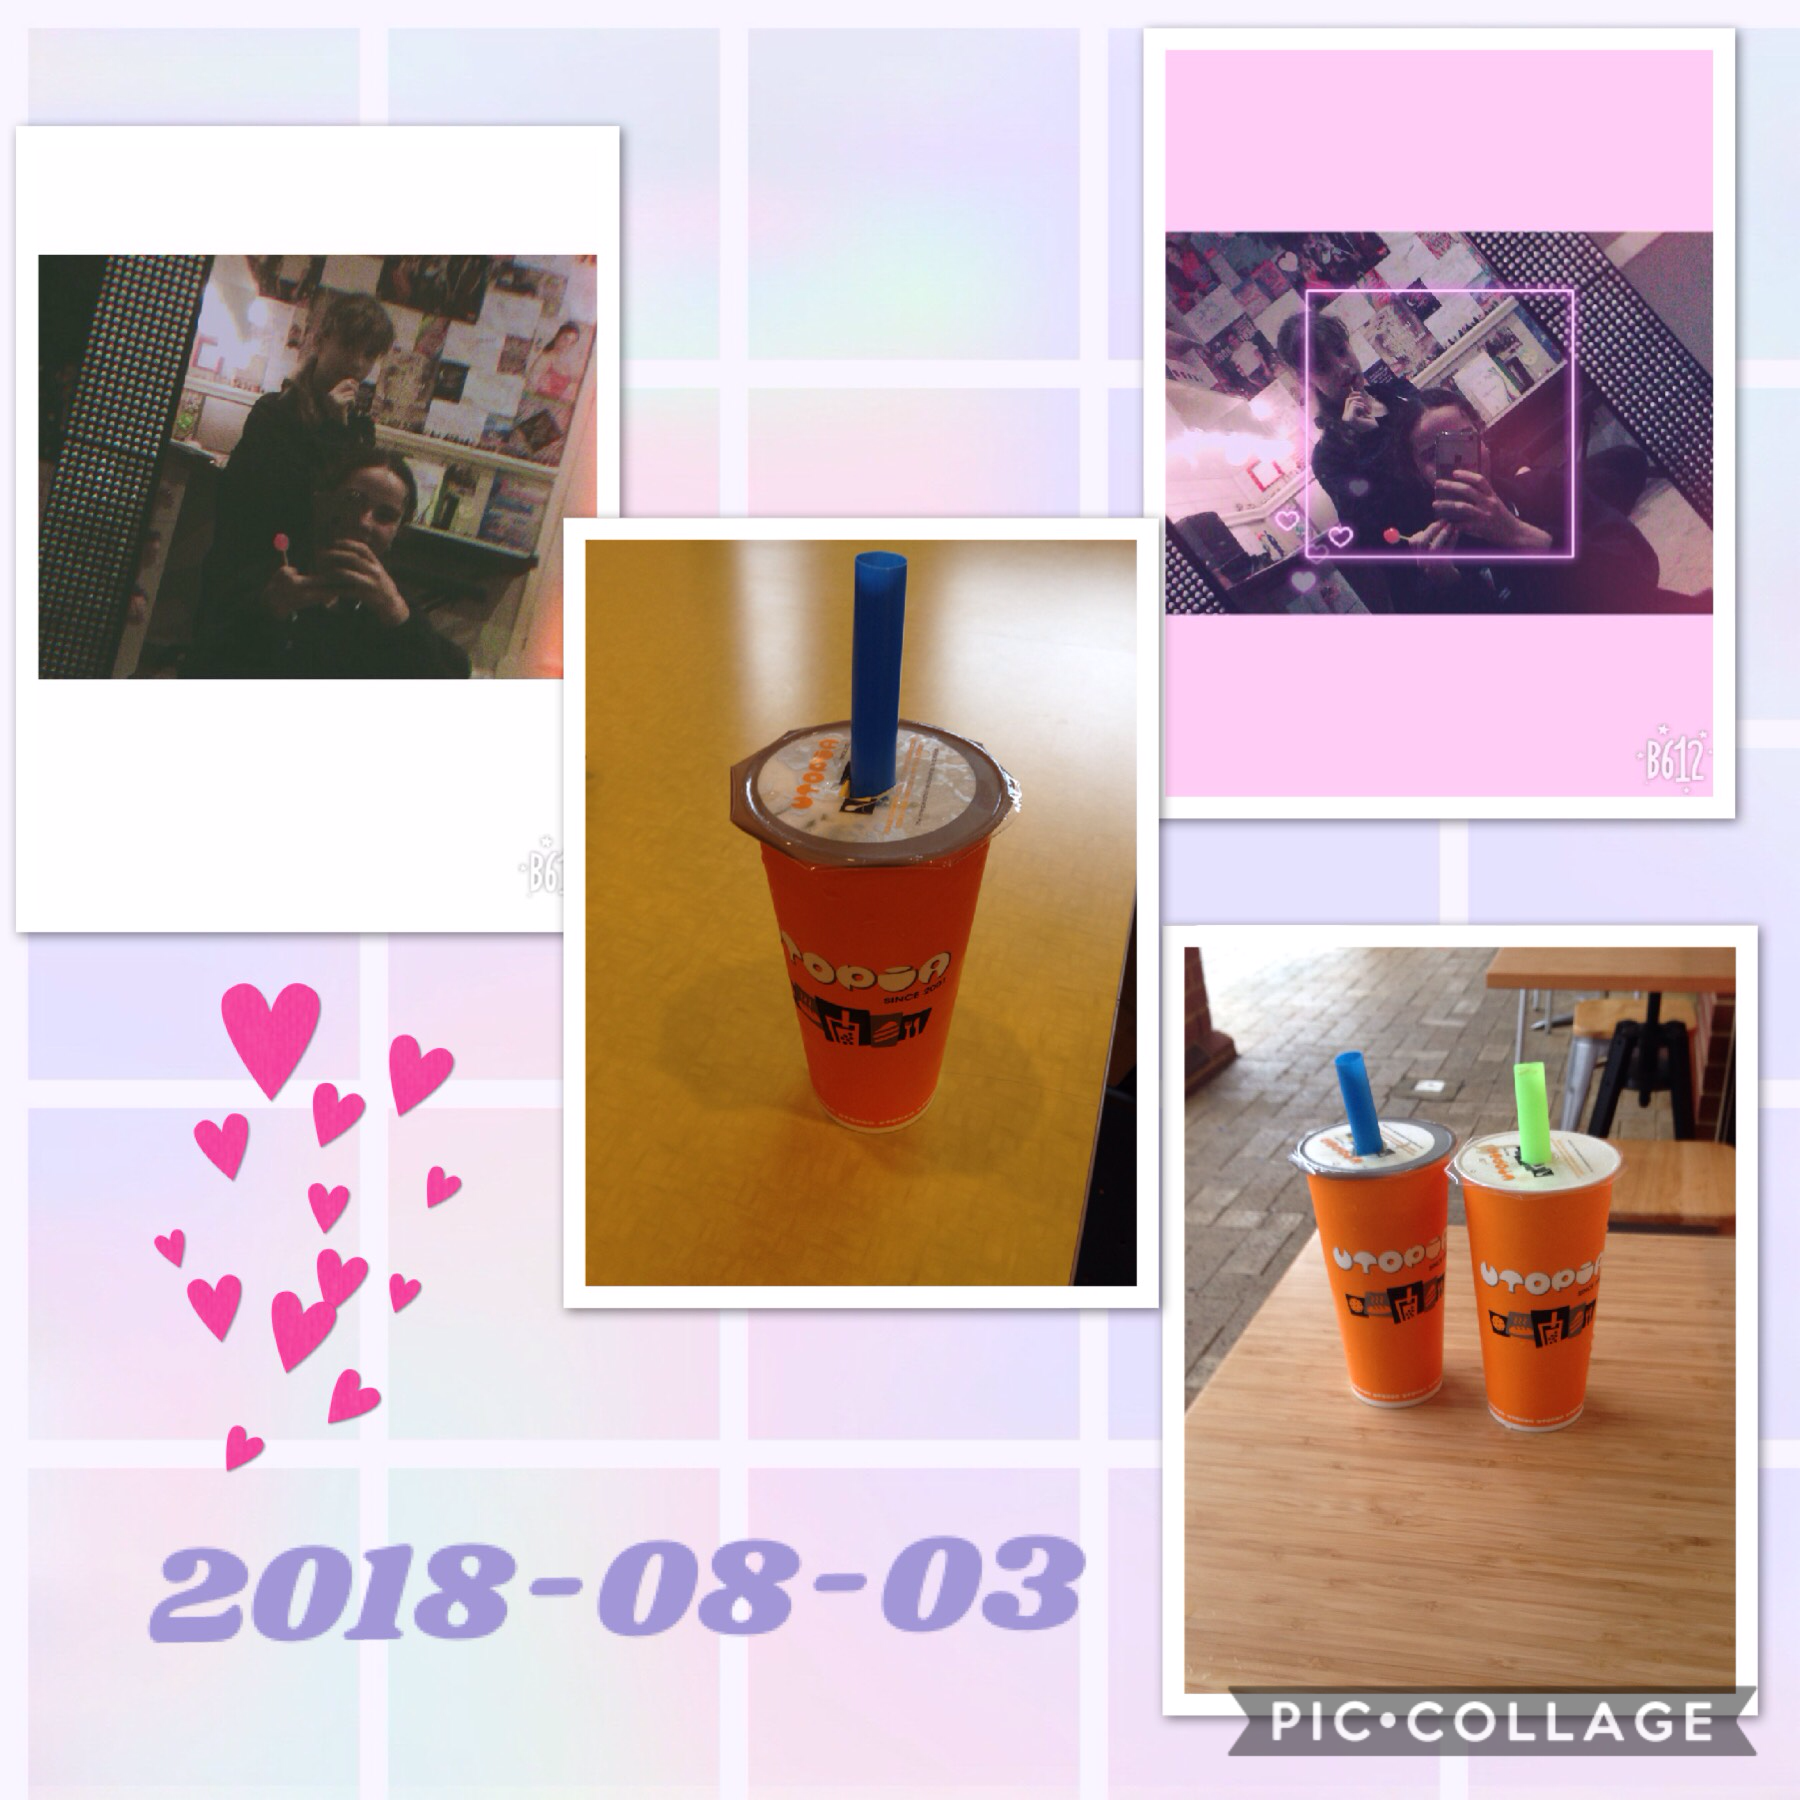 A day out with my friend!! Got some bubble tea!  ❤️⭐️🌈